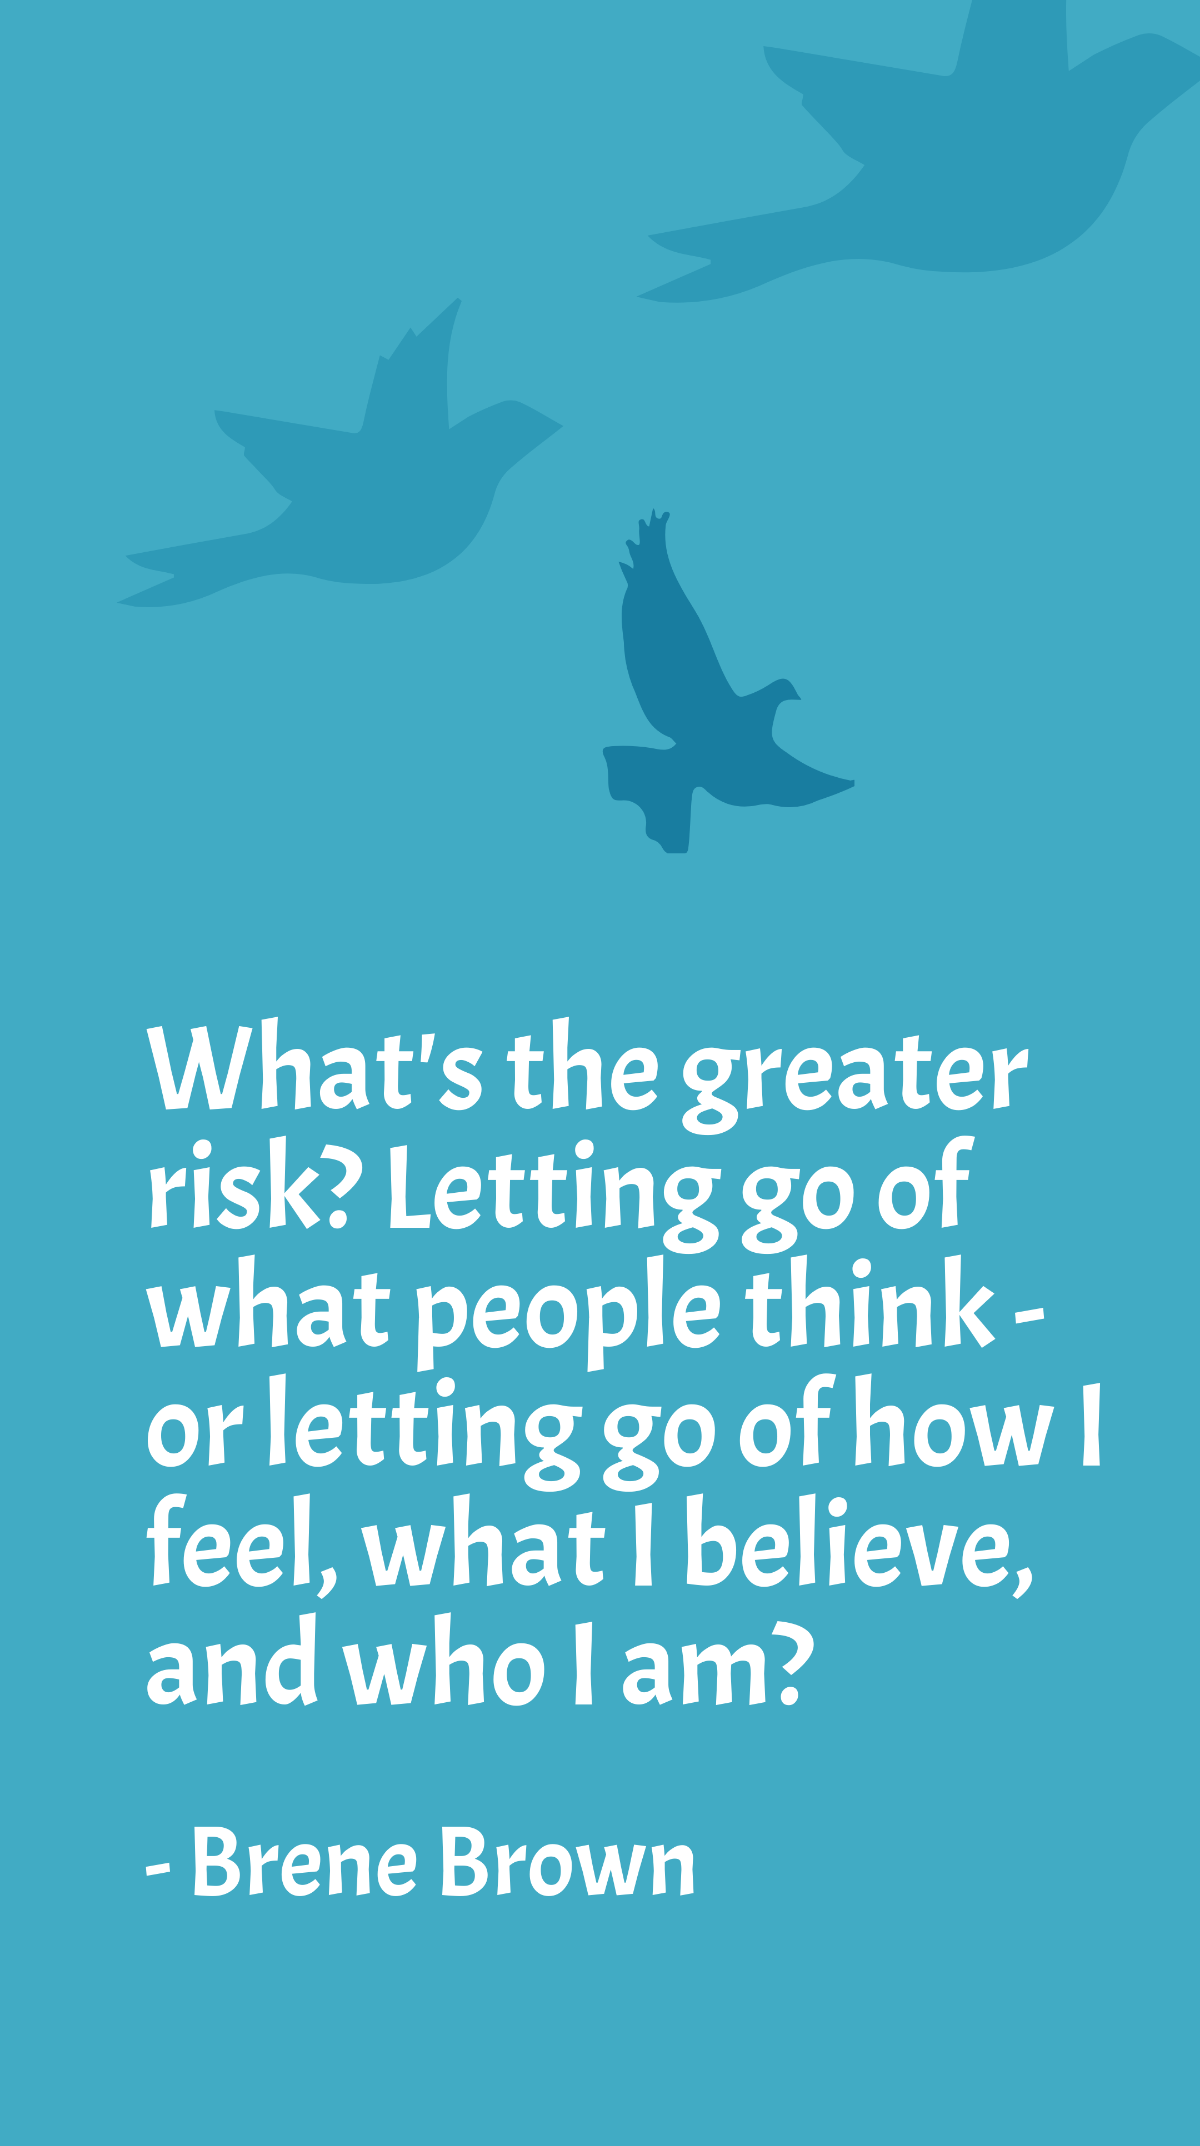 Brene Brown - What's the greater risk? Letting go of what people think - or letting go of how I feel, what I believe, and who I am? Template